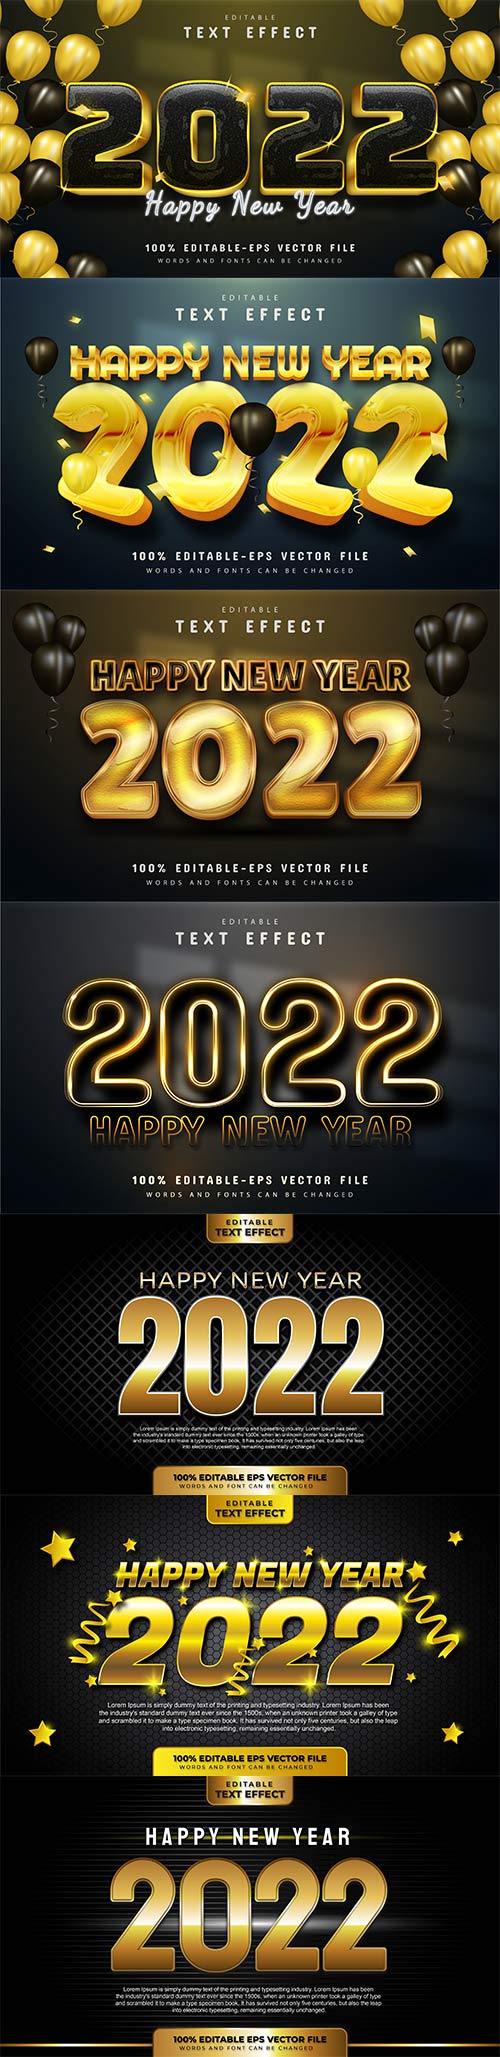 Happy new year 2022 gold 3d editable text effect premium vector